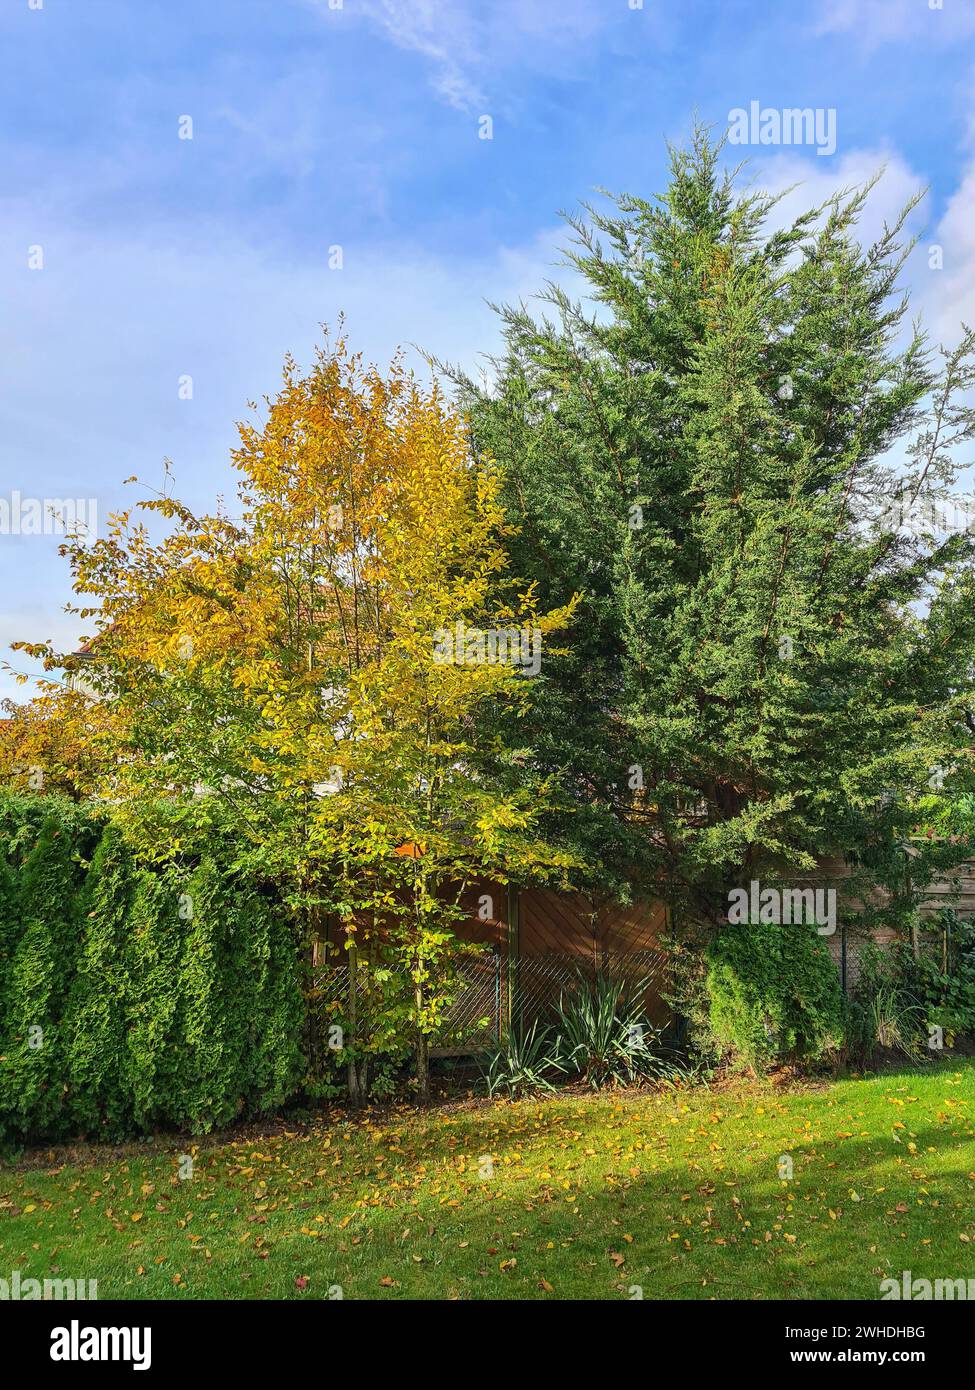 View into a garden of the native hornbeam with yellow fall foliage and green false cypress in the sunlight against a blue sky on the horizon Stock Photo